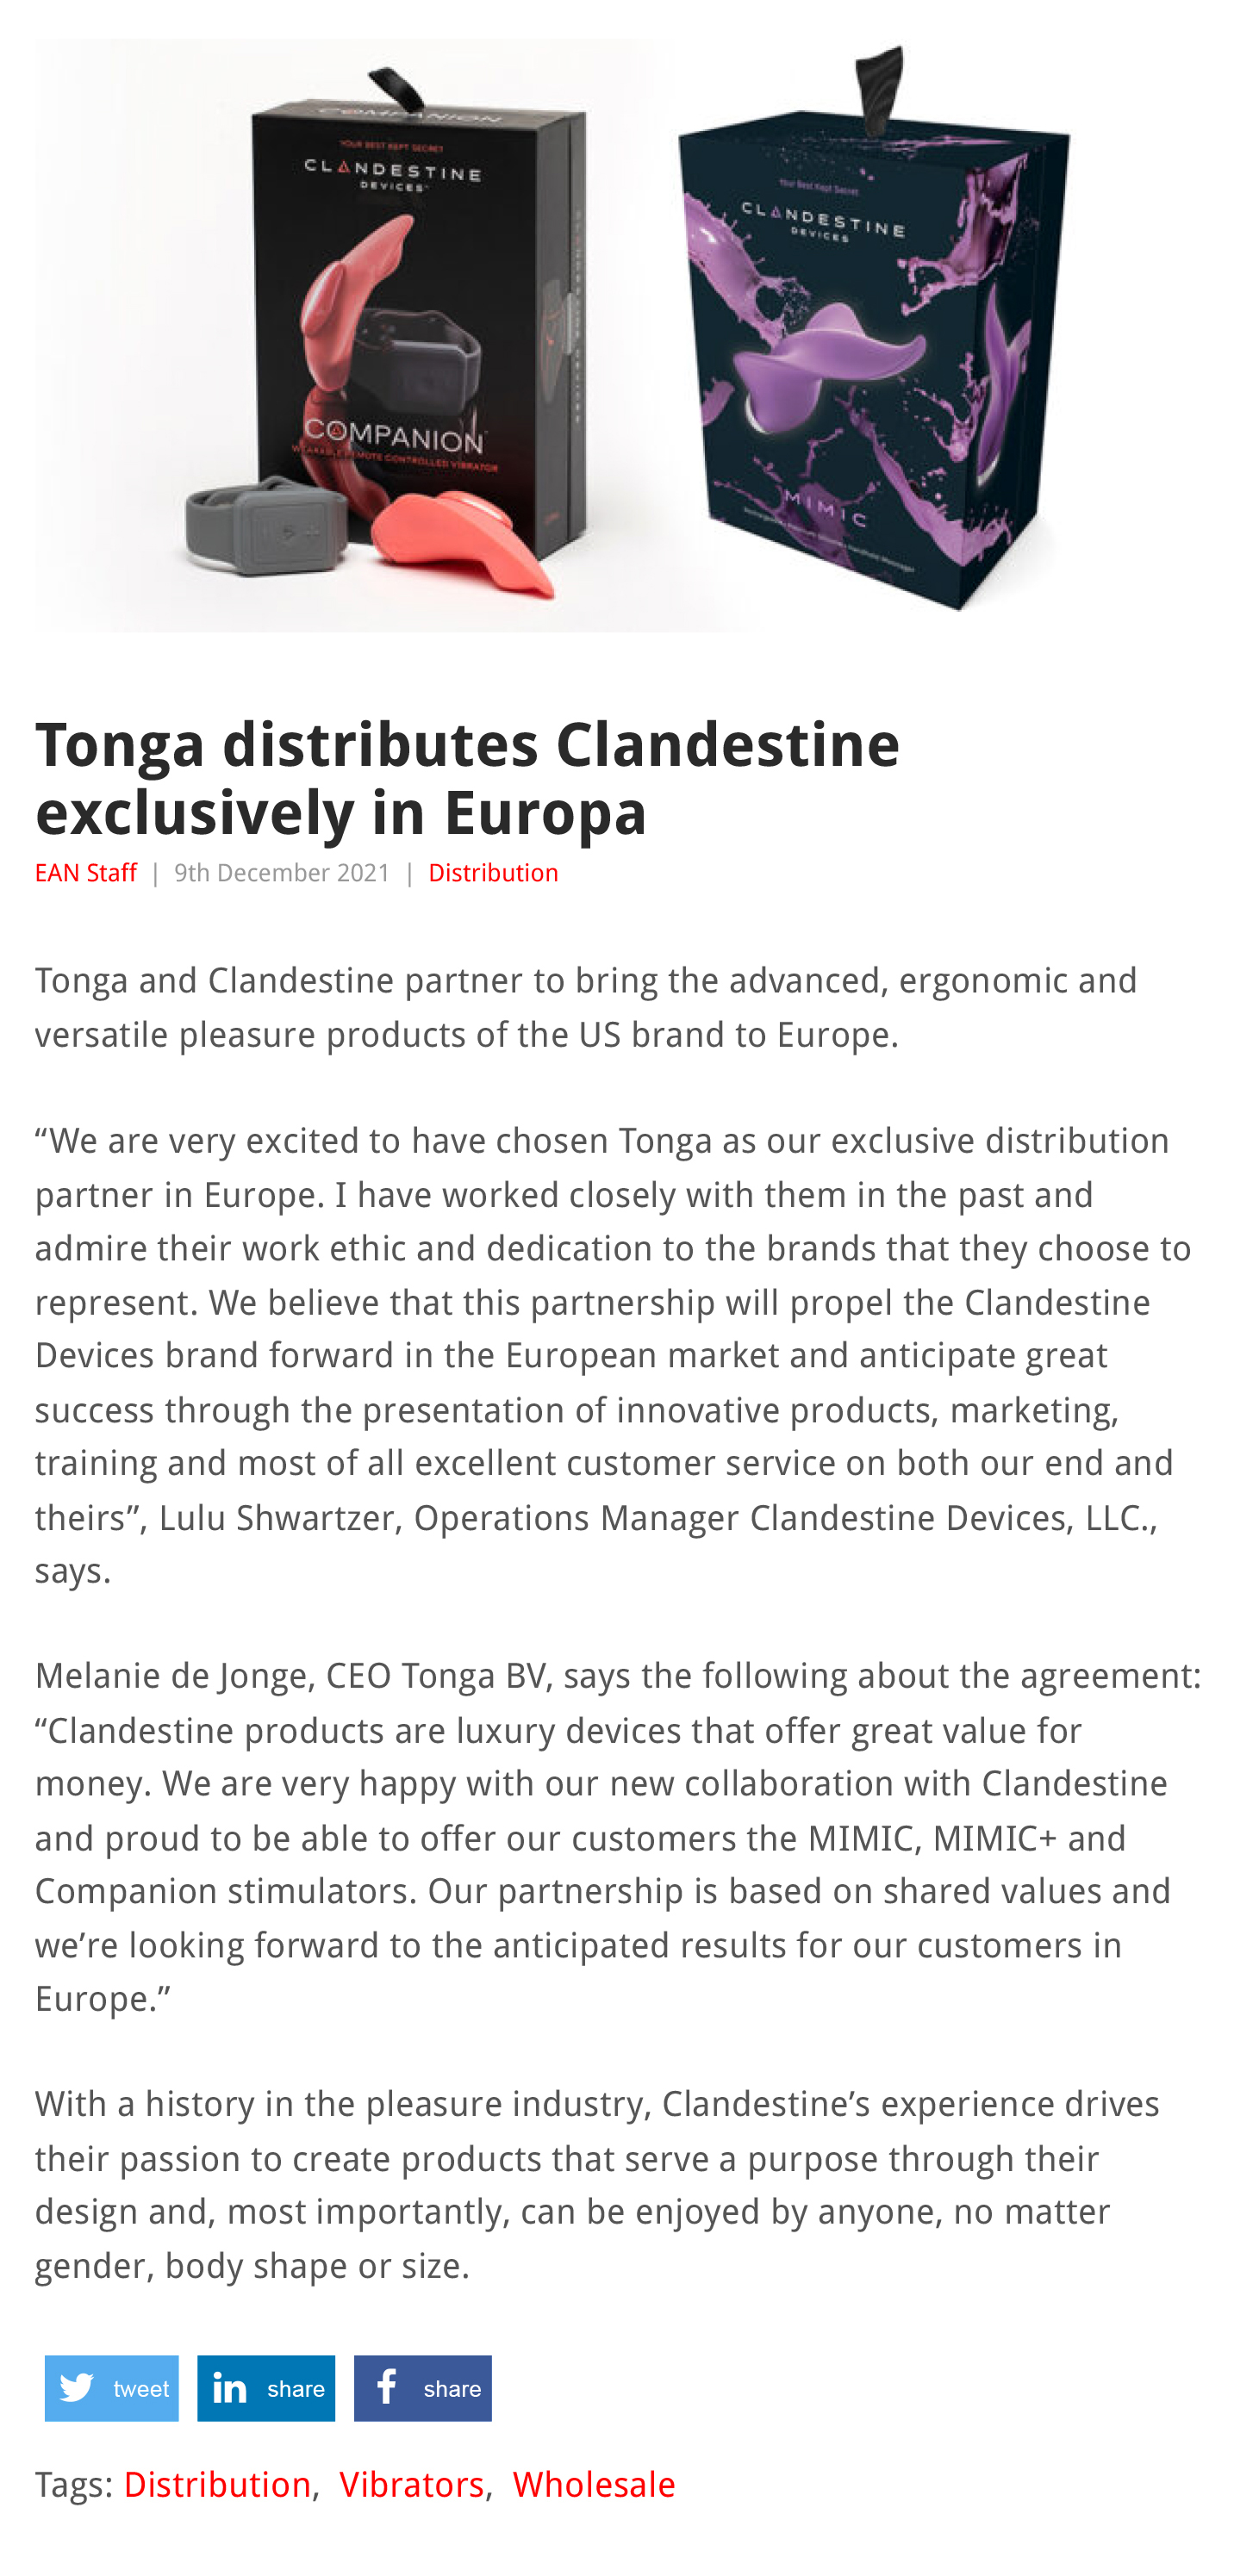 2021-12 EAN Online - Tonga and Clandestine